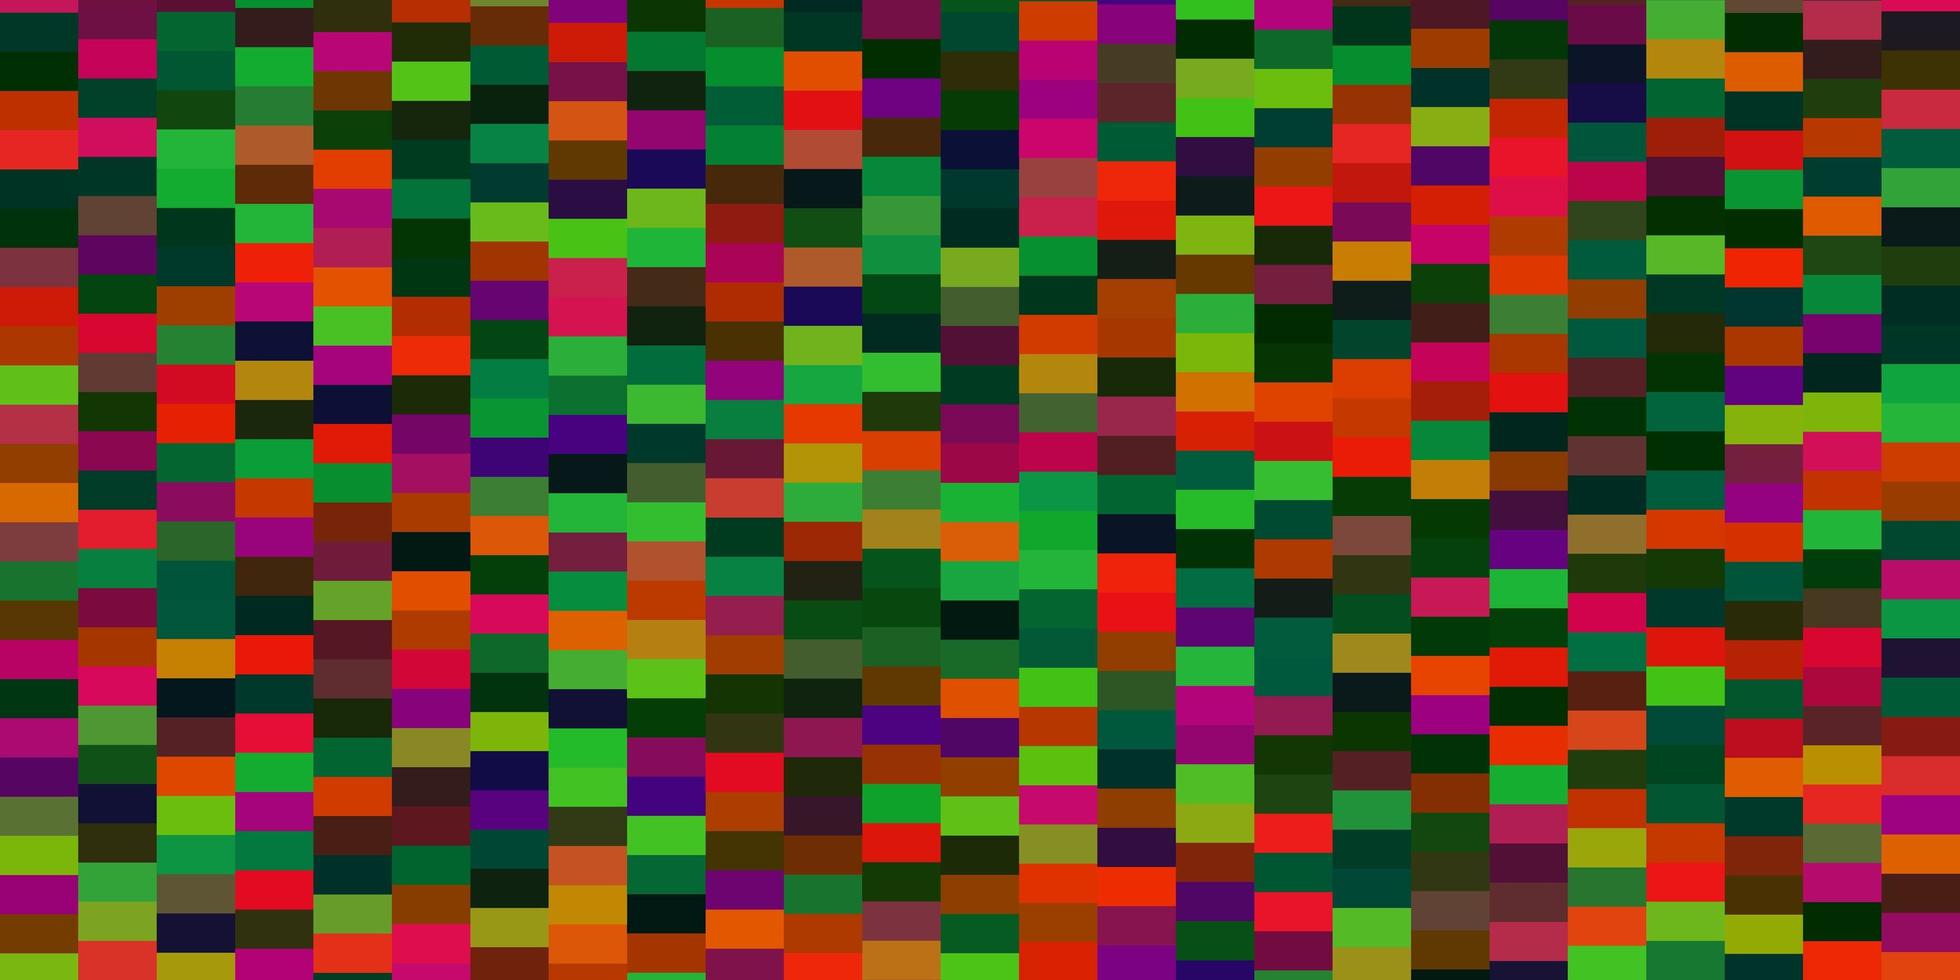 Dark Multicolor vector background with rectangles